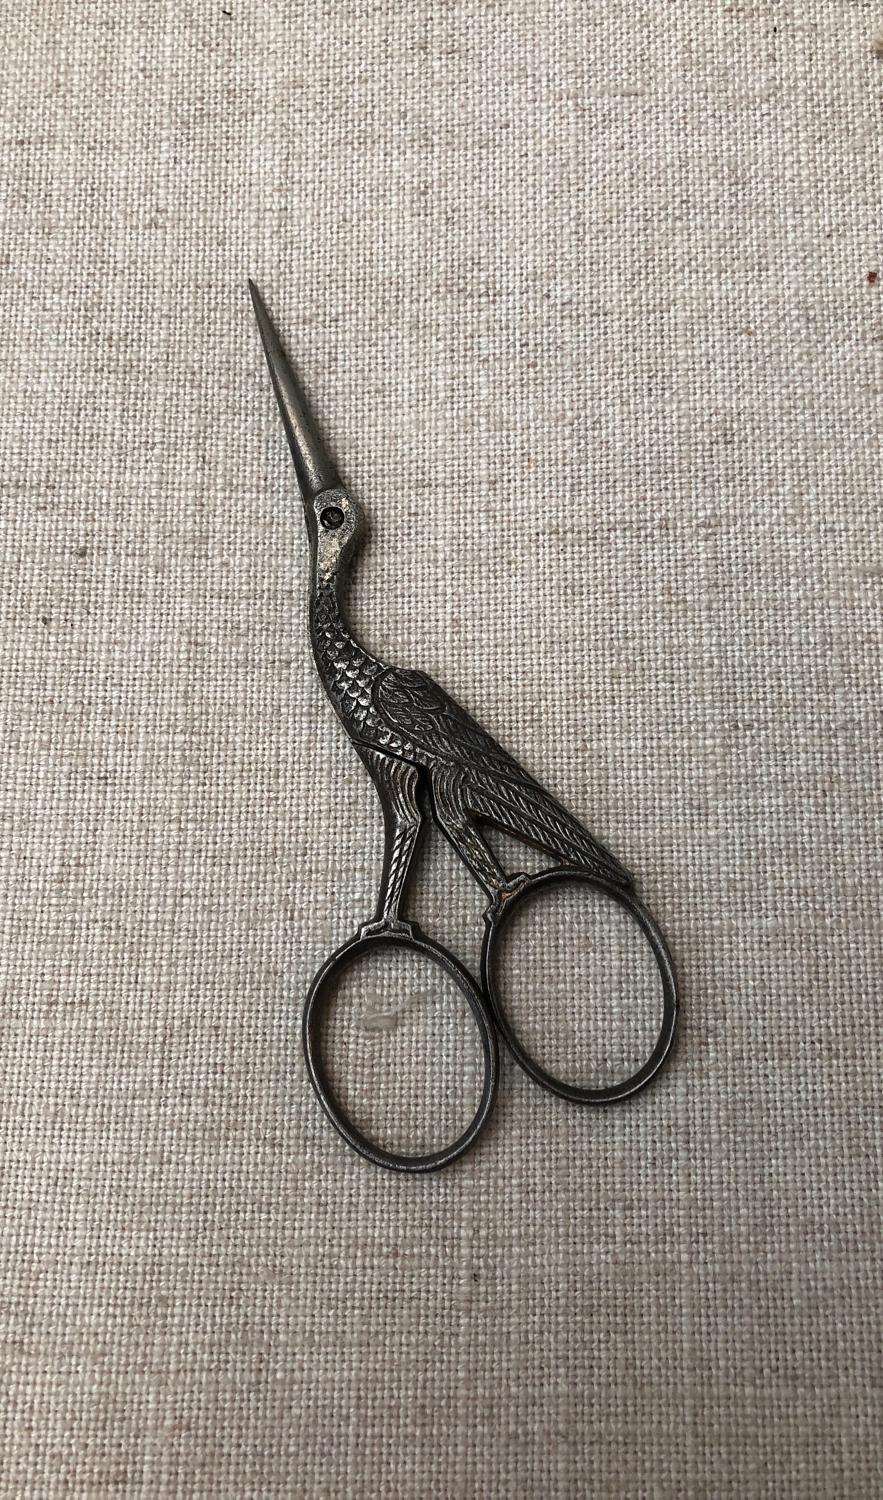 Early 20th Century Finely Detailed Scissors Shaped as a Bird